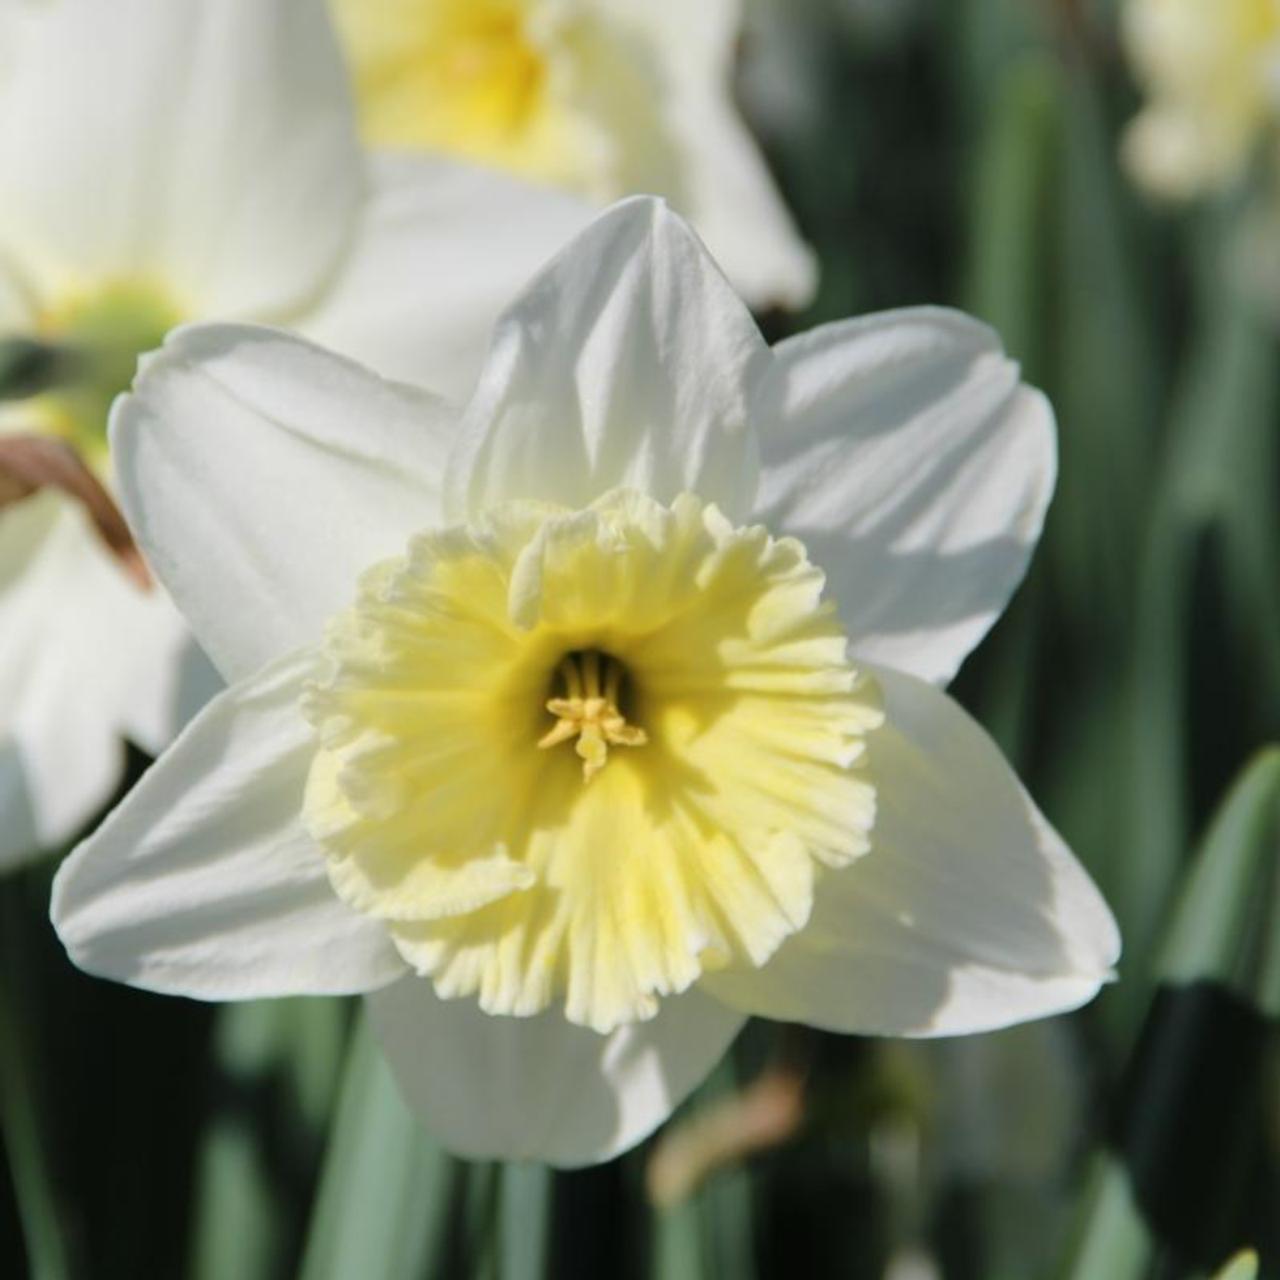 Narcissus 'Ice Follies' plant